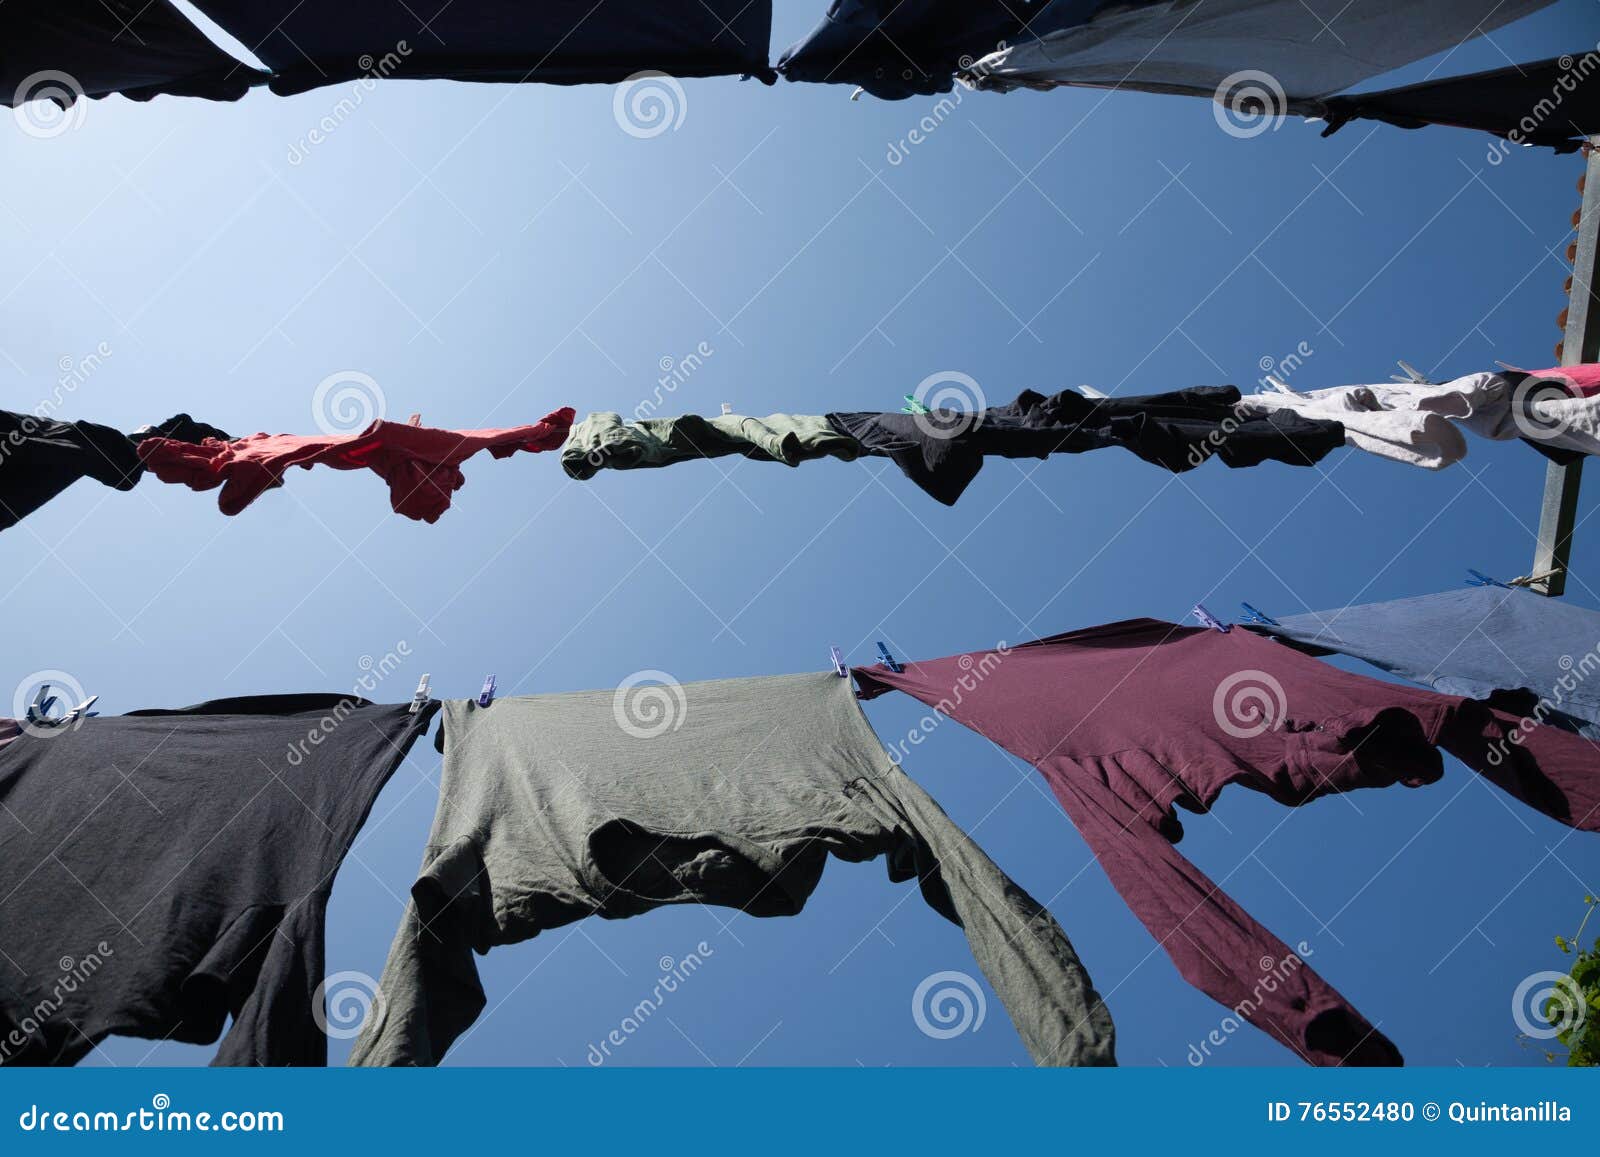 Horizontal Low View of Shirts Hanging in Clothesline Stock Photo ...